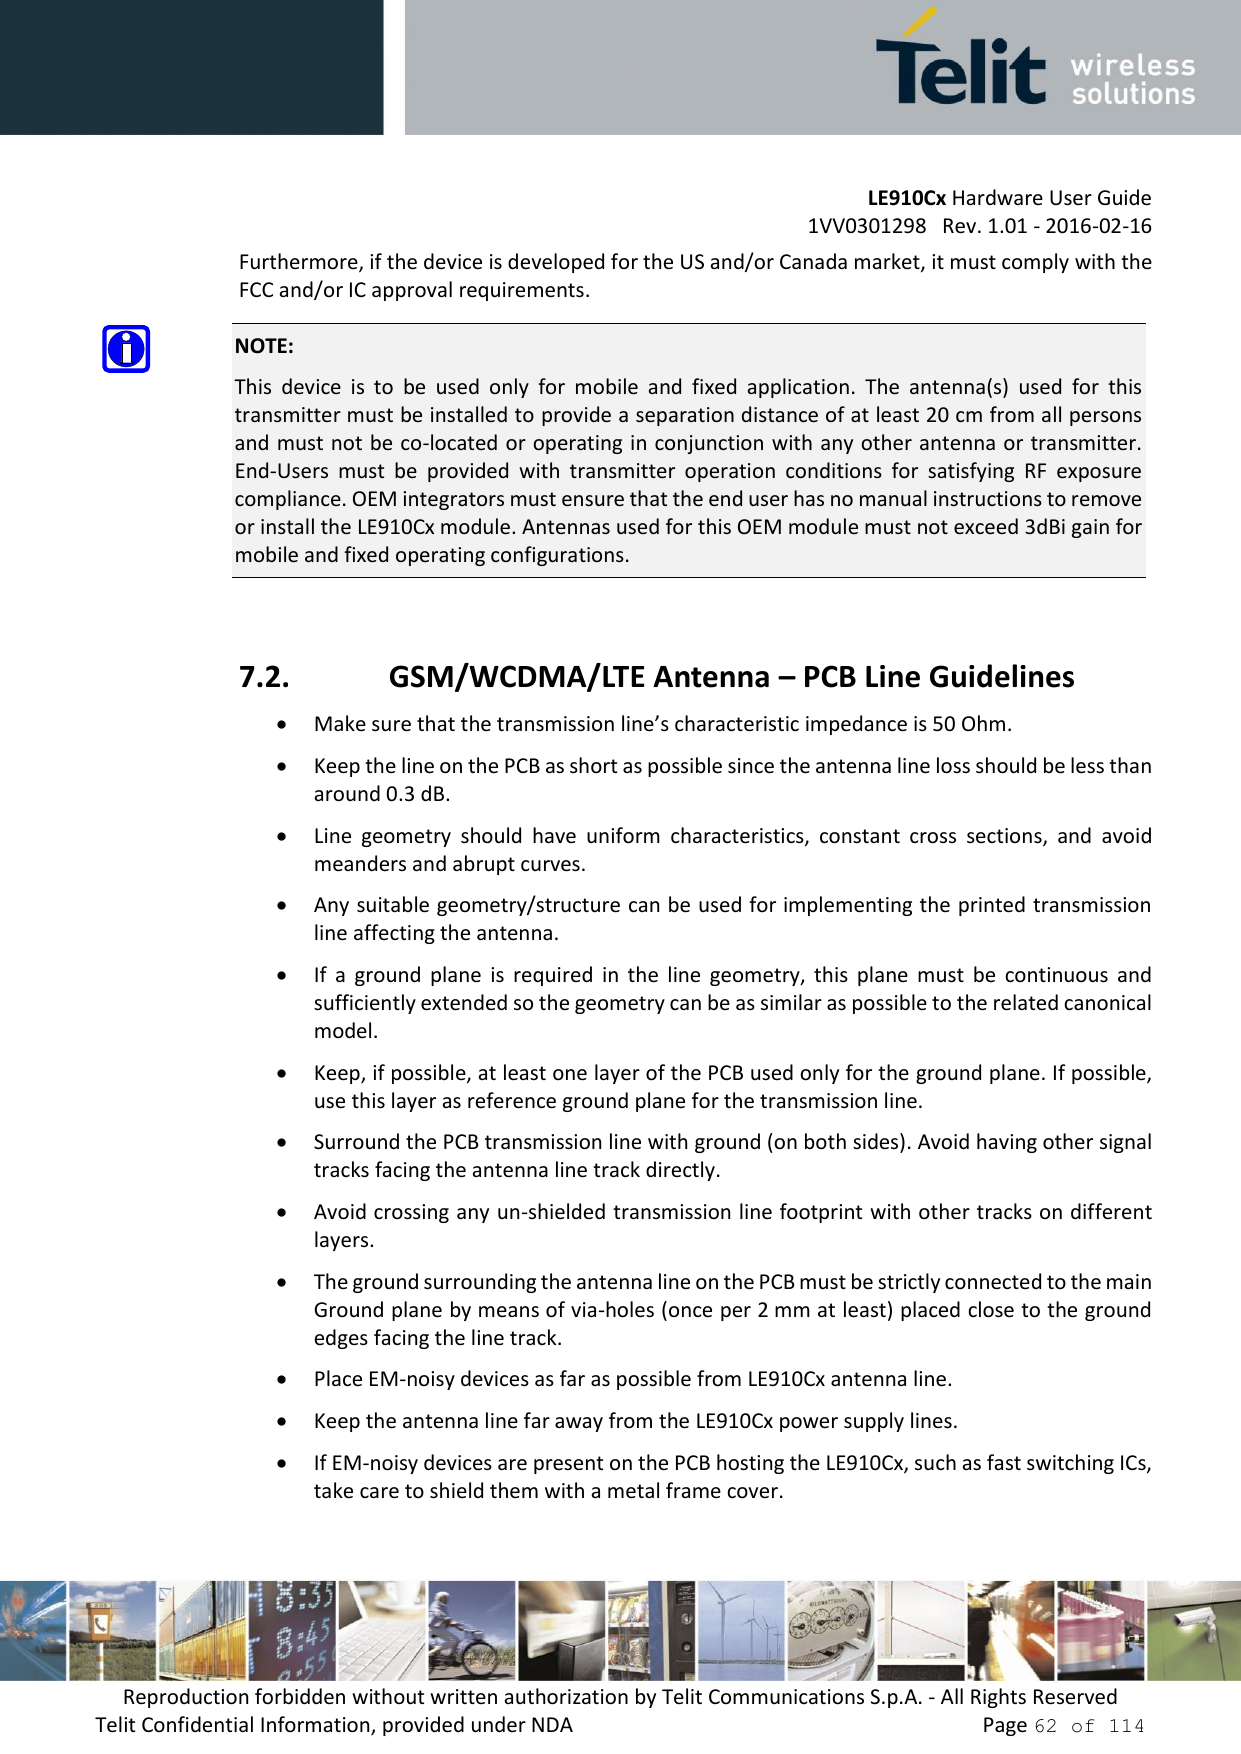         LE910Cx Hardware User Guide     1VV0301298   Rev. 1.01 - 2016-02-16 Reproduction forbidden without written authorization by Telit Communications S.p.A. - All Rights Reserved Telit Confidential Information, provided under NDA                 Page 62 of 114 Furthermore, if the device is developed for the US and/or Canada market, it must comply with the FCC and/or IC approval requirements.  NOTE: This  device  is  to  be  used  only  for  mobile  and  fixed  application.  The  antenna(s)  used  for  this transmitter must be installed to provide a separation distance of at least 20 cm from all persons and must not be co-located or operating in conjunction with any other antenna or transmitter. End-Users  must  be  provided  with  transmitter  operation  conditions  for  satisfying  RF  exposure compliance. OEM integrators must ensure that the end user has no manual instructions to remove or install the LE910Cx module. Antennas used for this OEM module must not exceed 3dBi gain for mobile and fixed operating configurations.  7.2. GSM/WCDMA/LTE Antenna – PCB Line Guidelines  Make sure that the transmission line’s characteristic impedance is 50 Ohm.  Keep the line on the PCB as short as possible since the antenna line loss should be less than around 0.3 dB.  Line  geometry  should  have  uniform  characteristics,  constant  cross  sections,  and  avoid meanders and abrupt curves.  Any suitable geometry/structure can be used for implementing the printed transmission line affecting the antenna.  If  a  ground  plane  is  required  in  the  line  geometry,  this  plane  must  be  continuous  and sufficiently extended so the geometry can be as similar as possible to the related canonical model.  Keep, if possible, at least one layer of the PCB used only for the ground plane. If possible, use this layer as reference ground plane for the transmission line.  Surround the PCB transmission line with ground (on both sides). Avoid having other signal tracks facing the antenna line track directly.  Avoid crossing any un-shielded transmission line footprint with other tracks on different layers.  The ground surrounding the antenna line on the PCB must be strictly connected to the main Ground plane by means of via-holes (once per 2 mm at least) placed close to the ground edges facing the line track.  Place EM-noisy devices as far as possible from LE910Cx antenna line.  Keep the antenna line far away from the LE910Cx power supply lines.  If EM-noisy devices are present on the PCB hosting the LE910Cx, such as fast switching ICs, take care to shield them with a metal frame cover. 